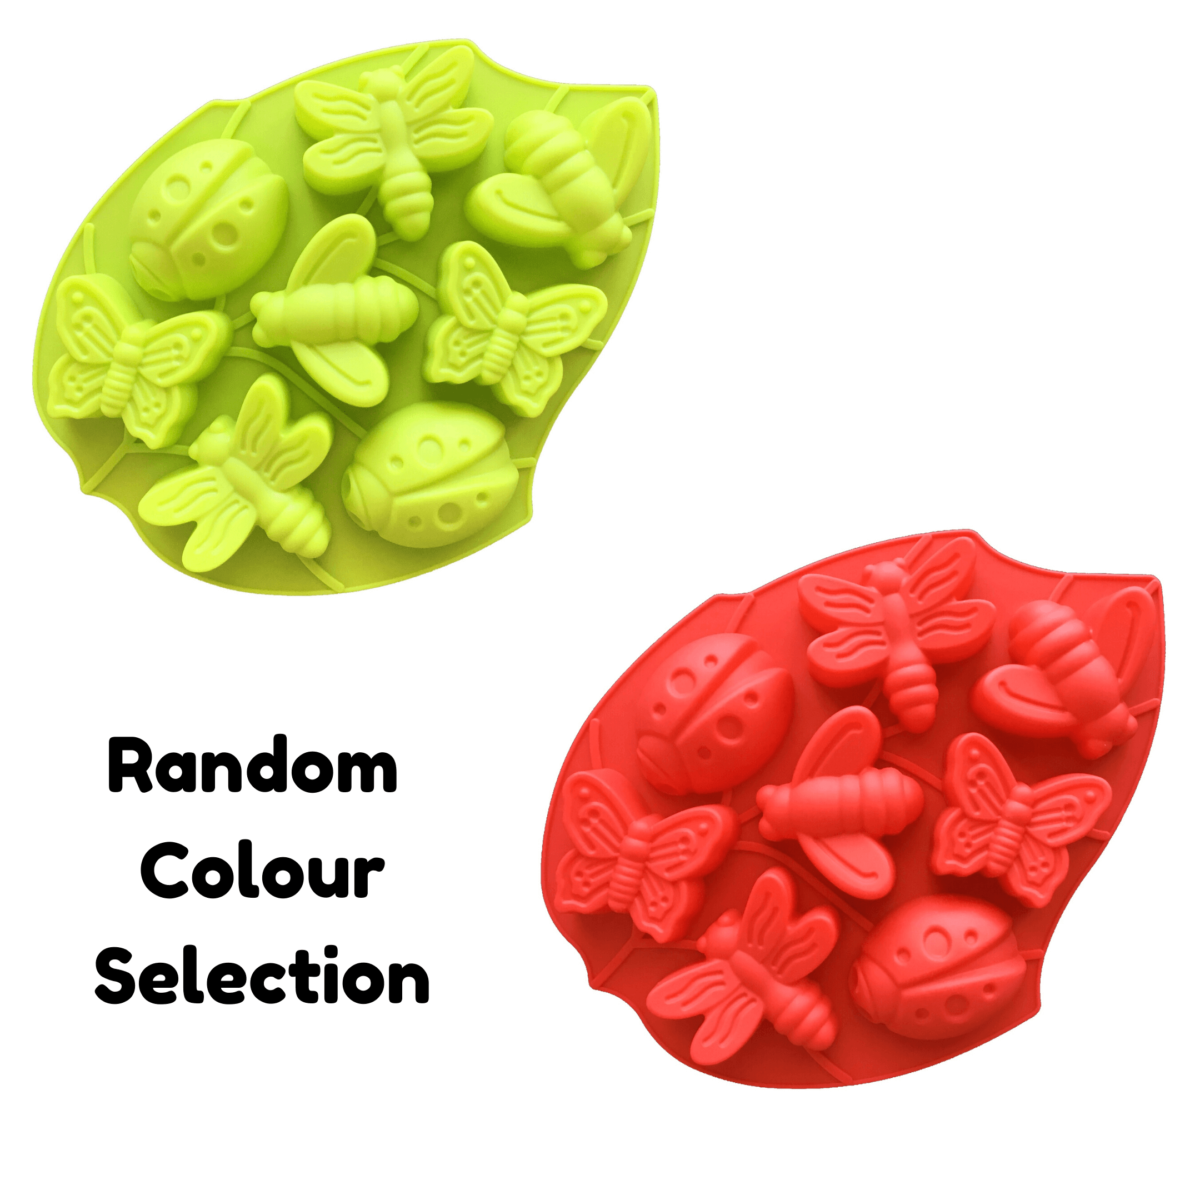 leaf-shaped silicone mould with eight cavities - two each of butterfly, bee, ladybug and dragonfly displayed in green and red with the text 'random colour selection'